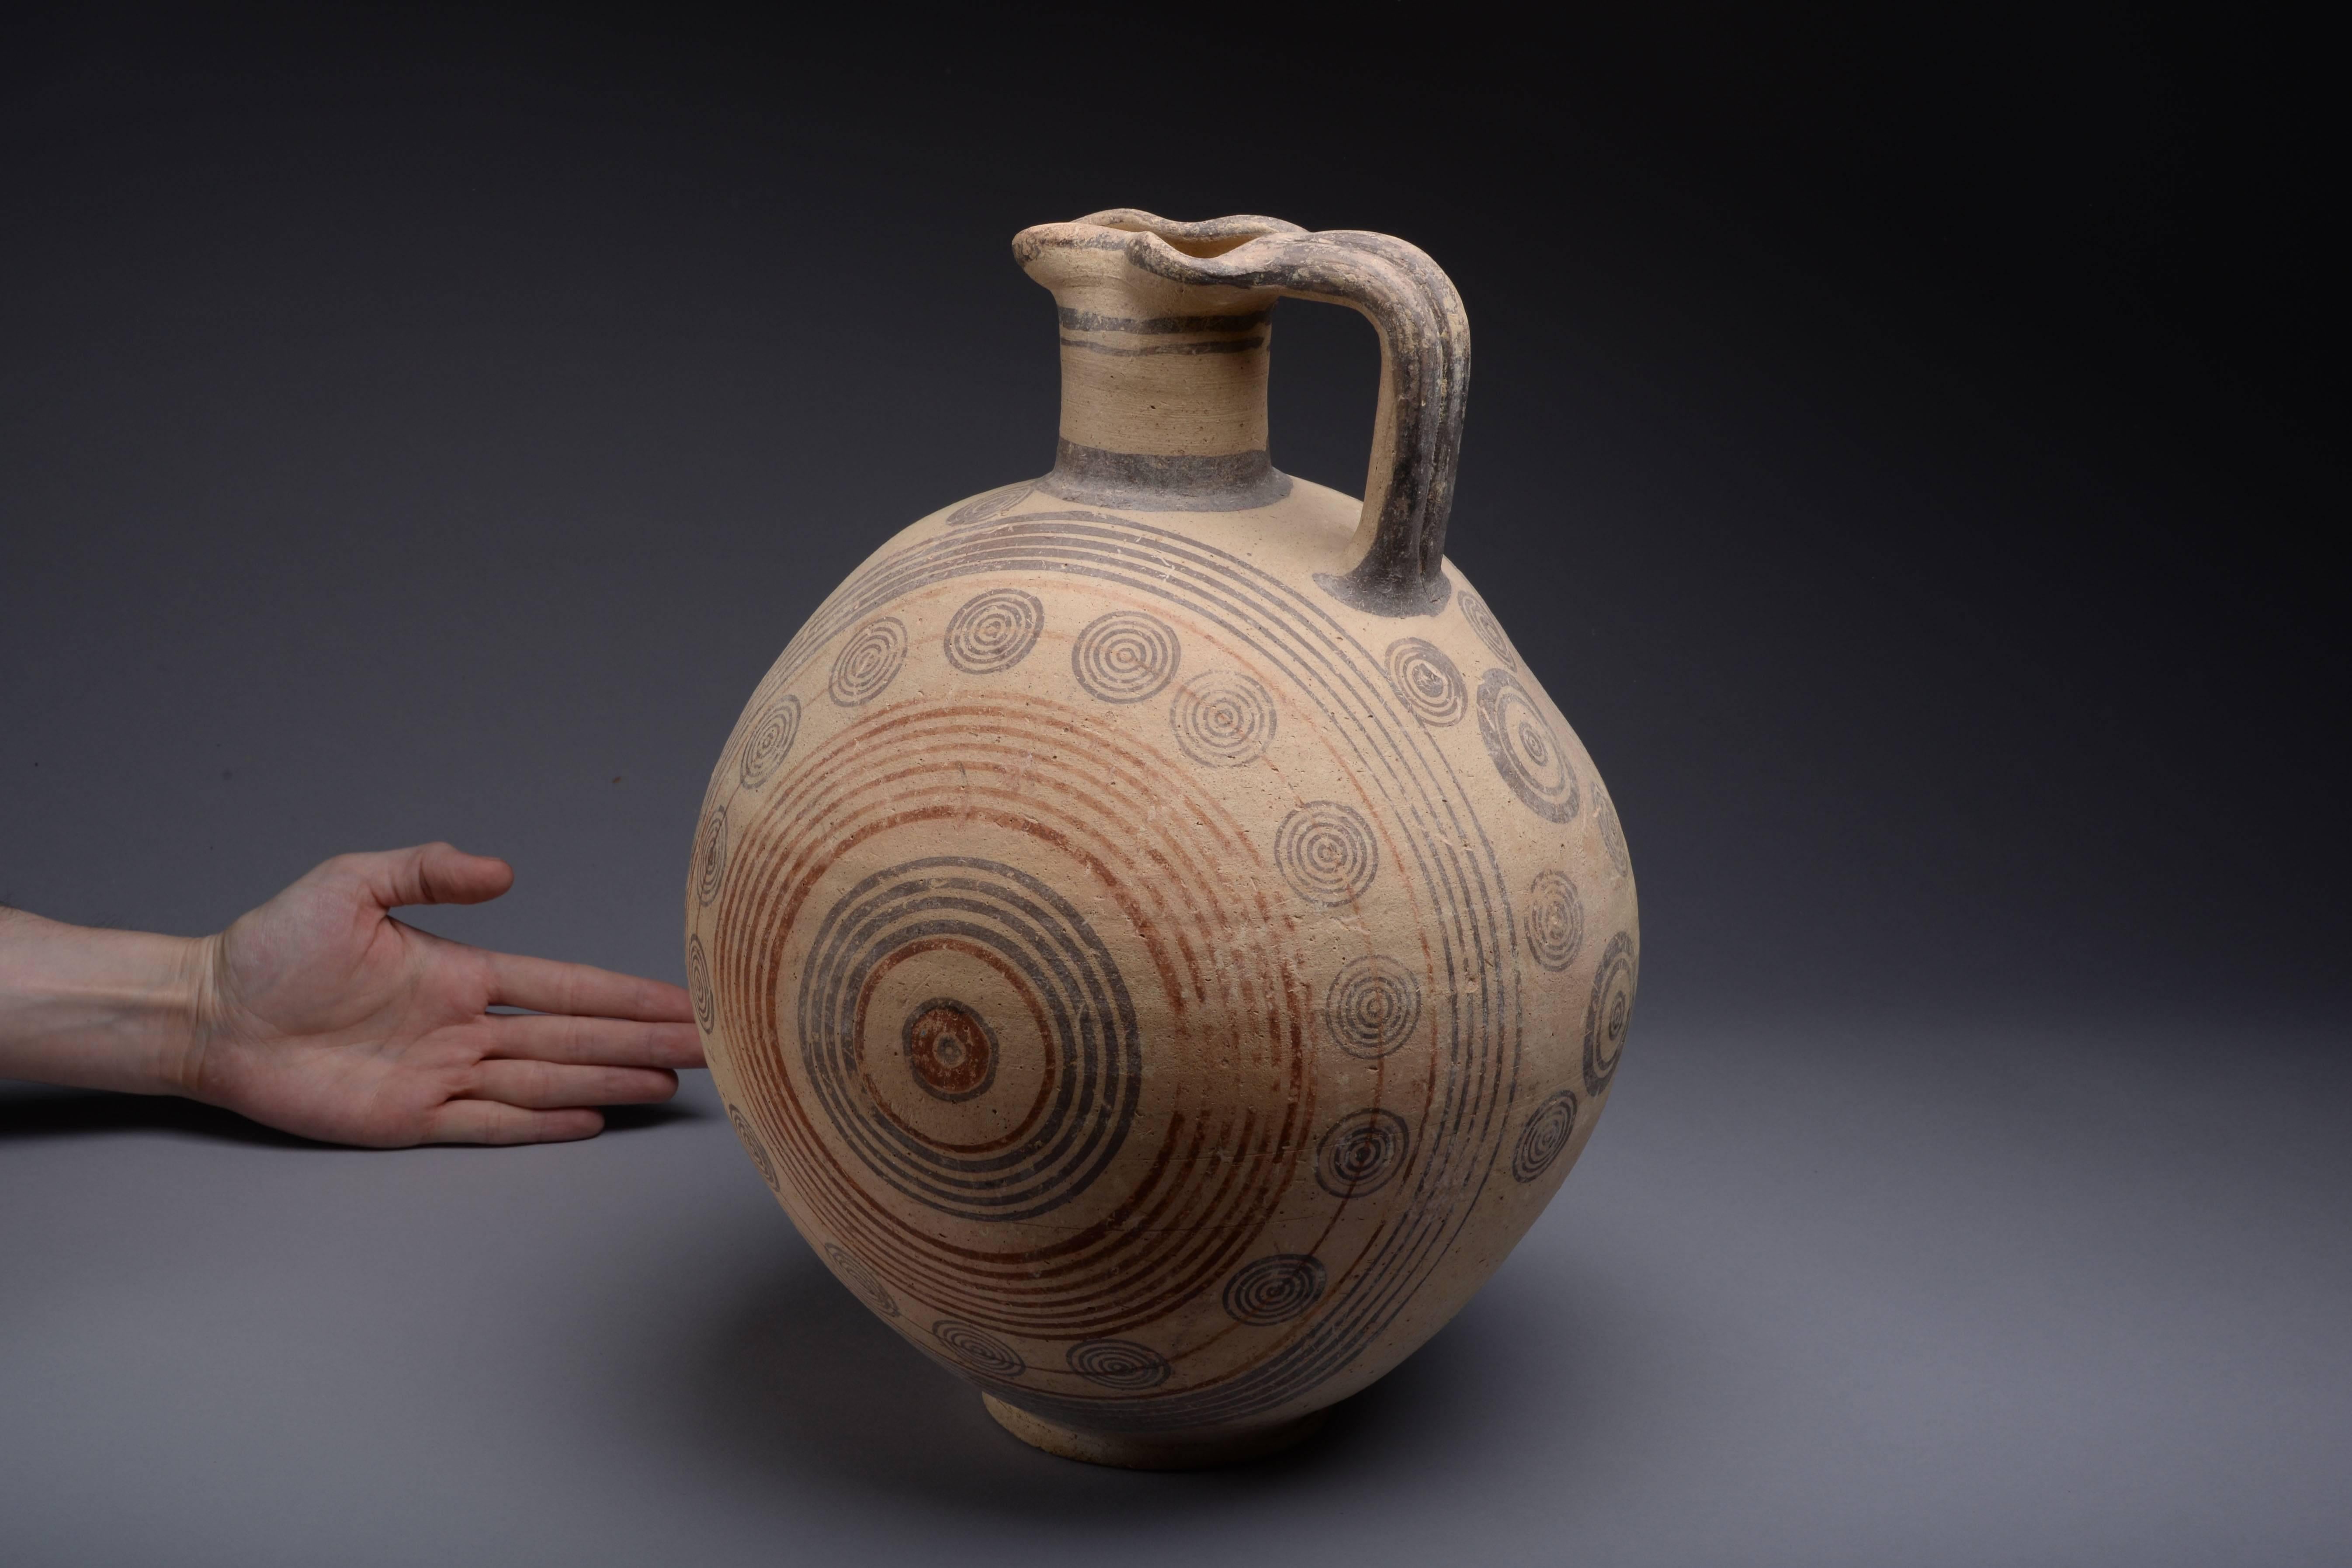 An exceptional, large bichrome jug (or oenochoe), from the Cypro-Geometric period of Cyprus, dating to approximately 950-750 BC. 
 
A fantastic example of an iconic Cypriot type, seldom found of this size, condition and with such a strong